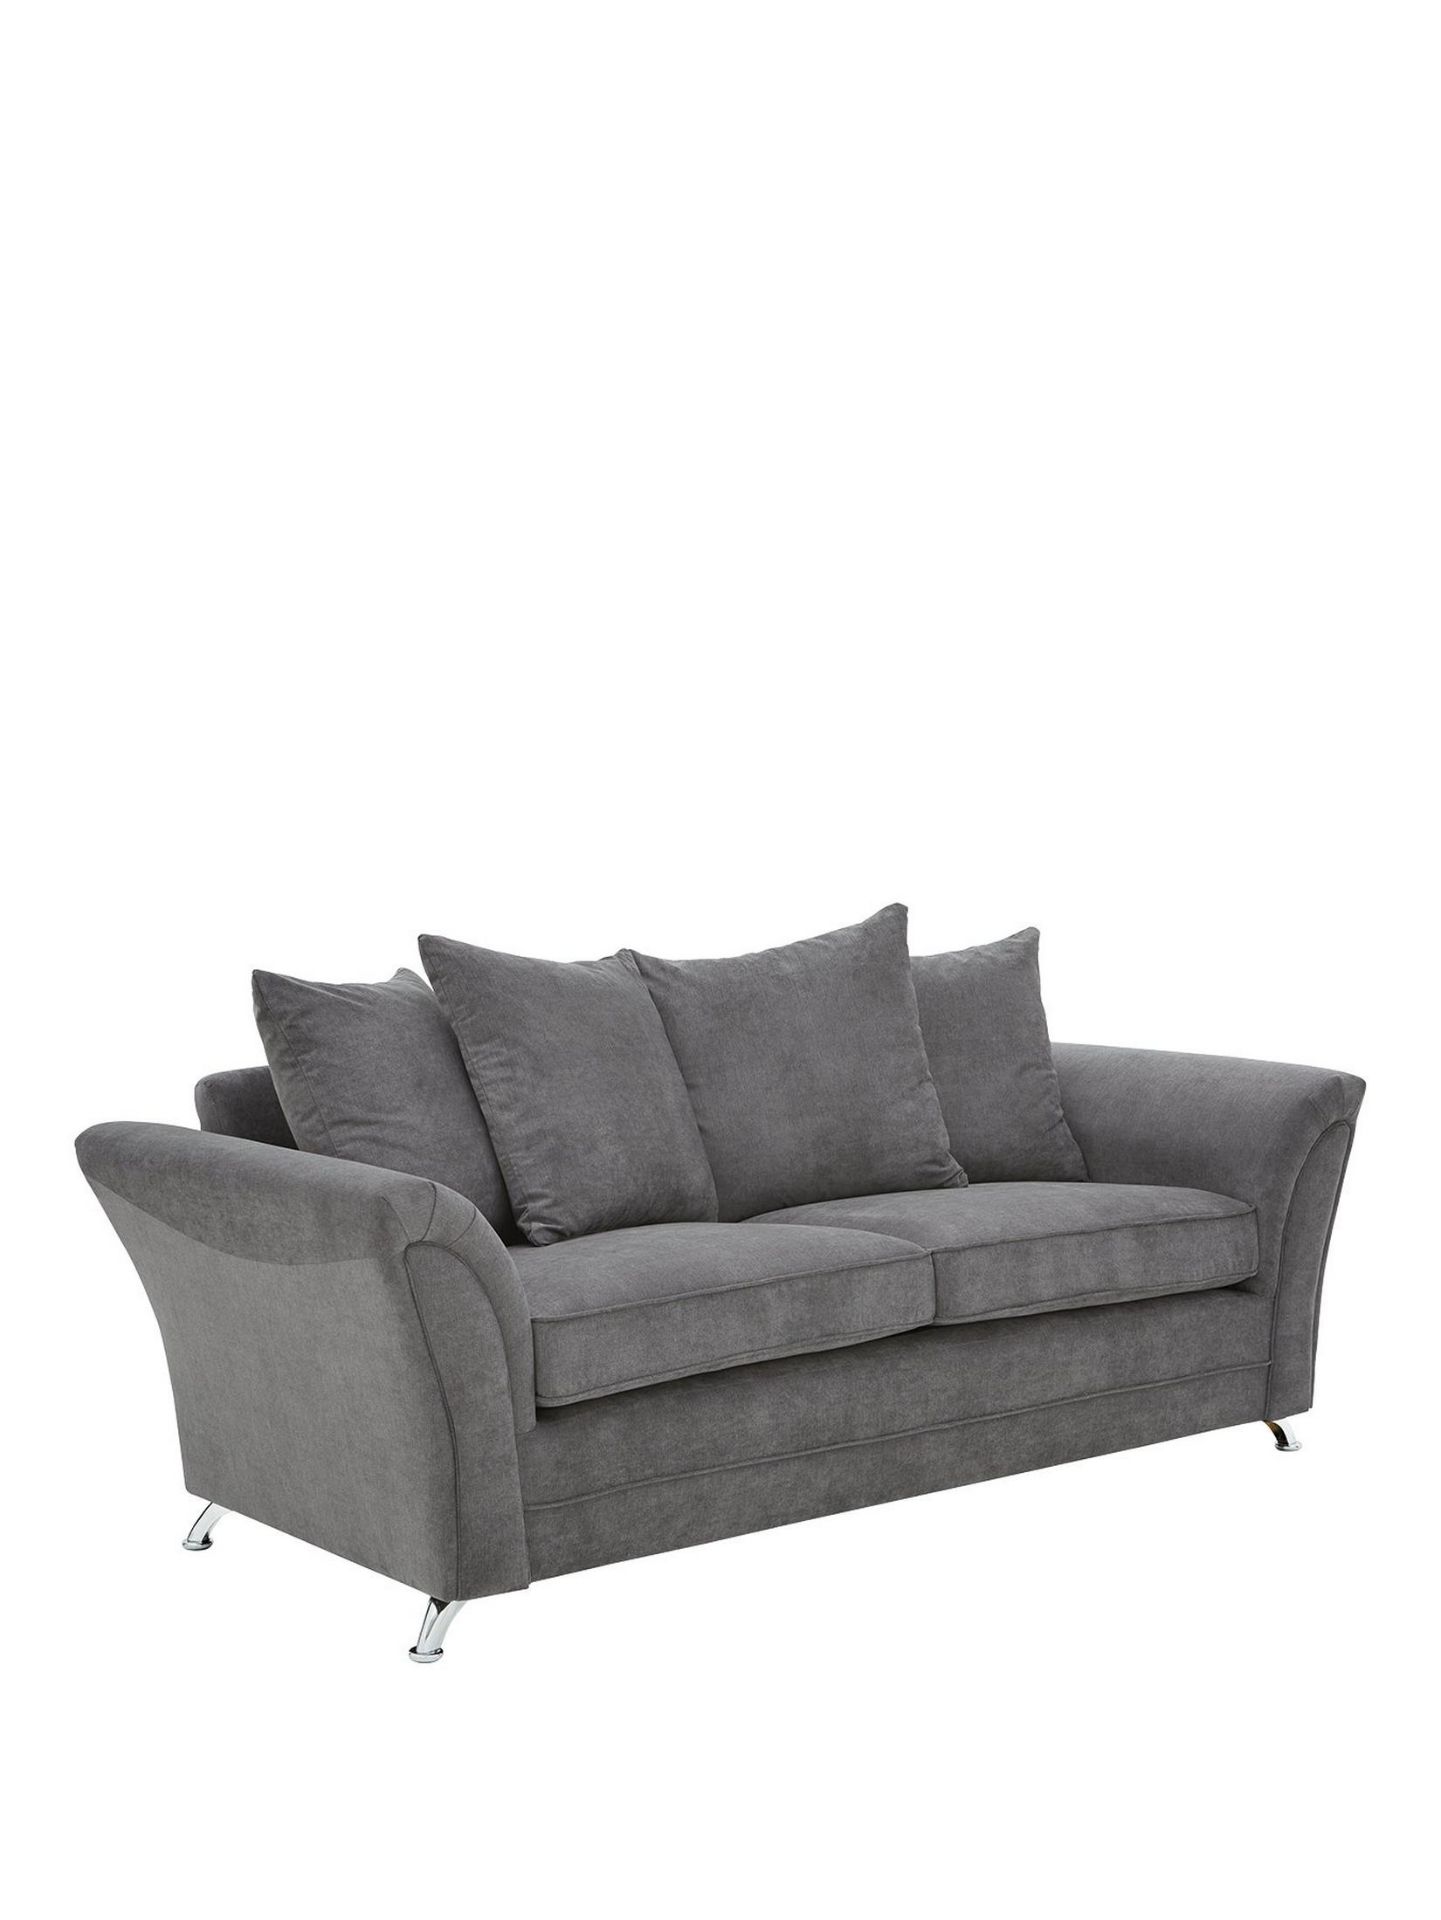 Dury 3 Seater Sofa. RPP £499.00 . H 92 x W 205 x D 90cm Homely comfort Dury is upholstered in a - Image 3 of 3